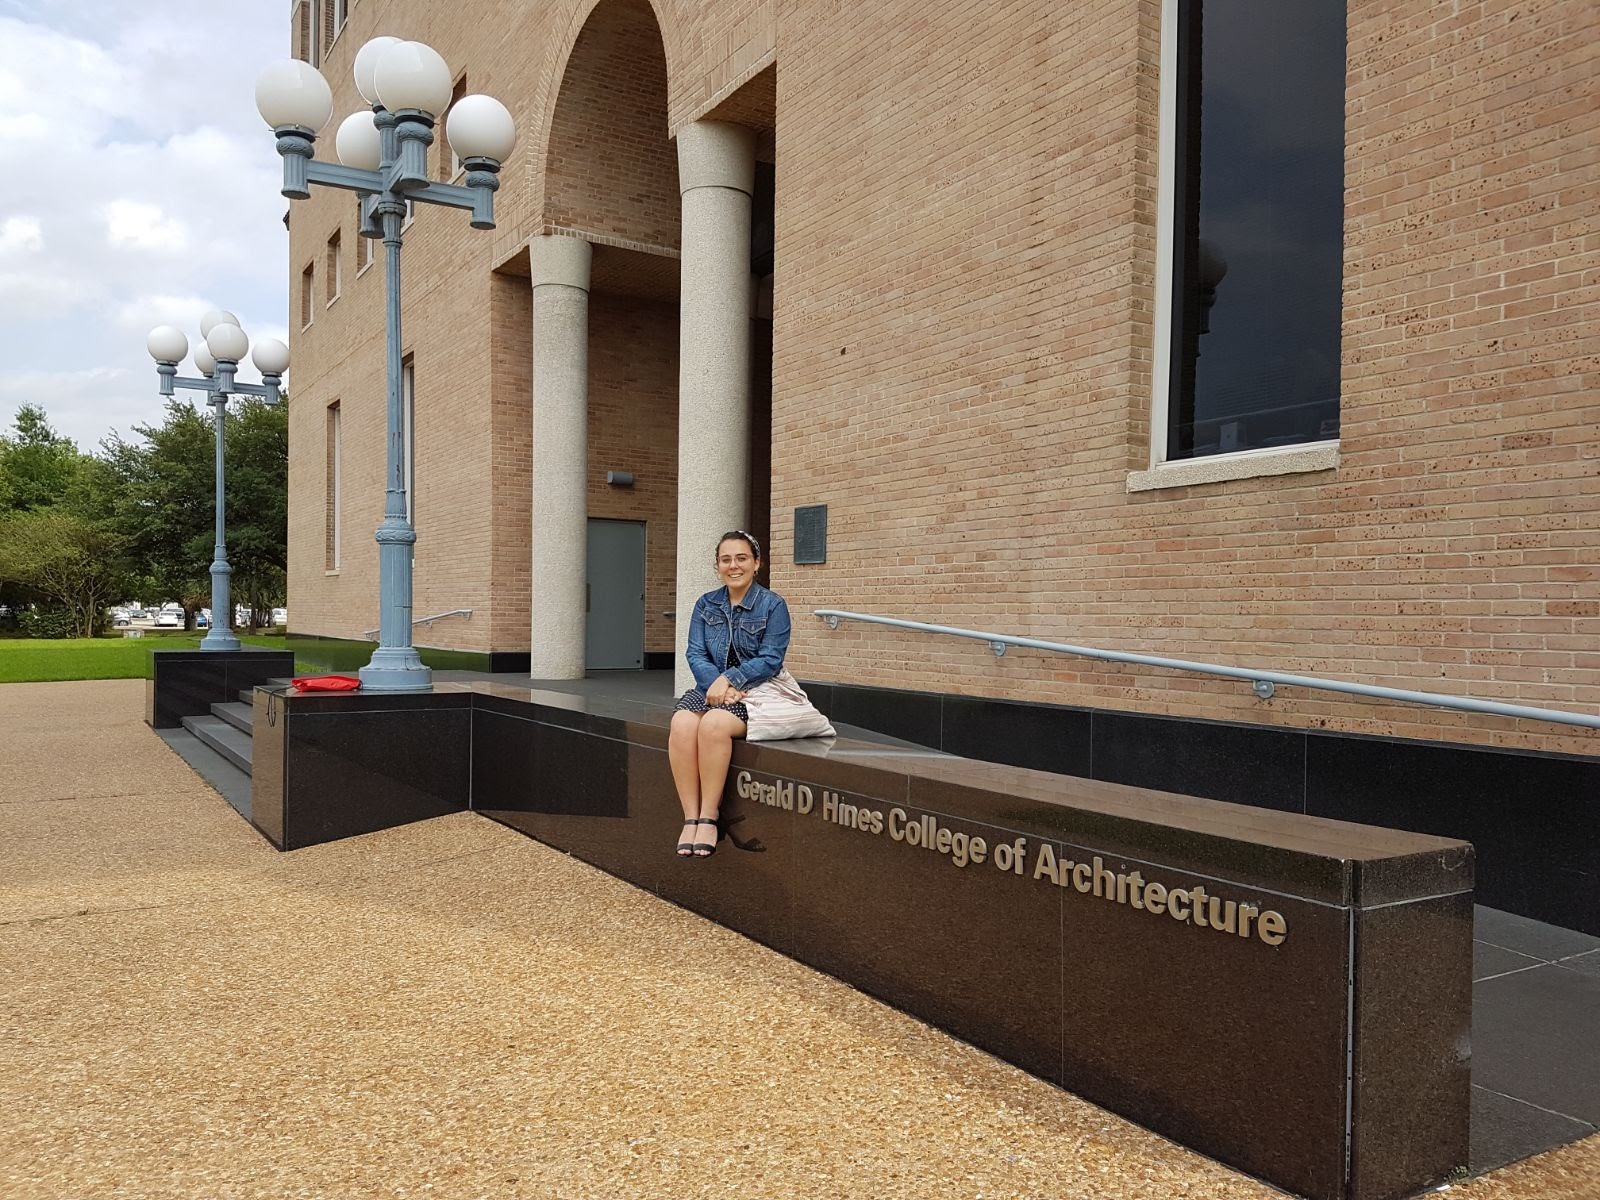 Maria, the primary focus of the story, sits atop a ledge in front of the entrance to the College of Architecture and Design